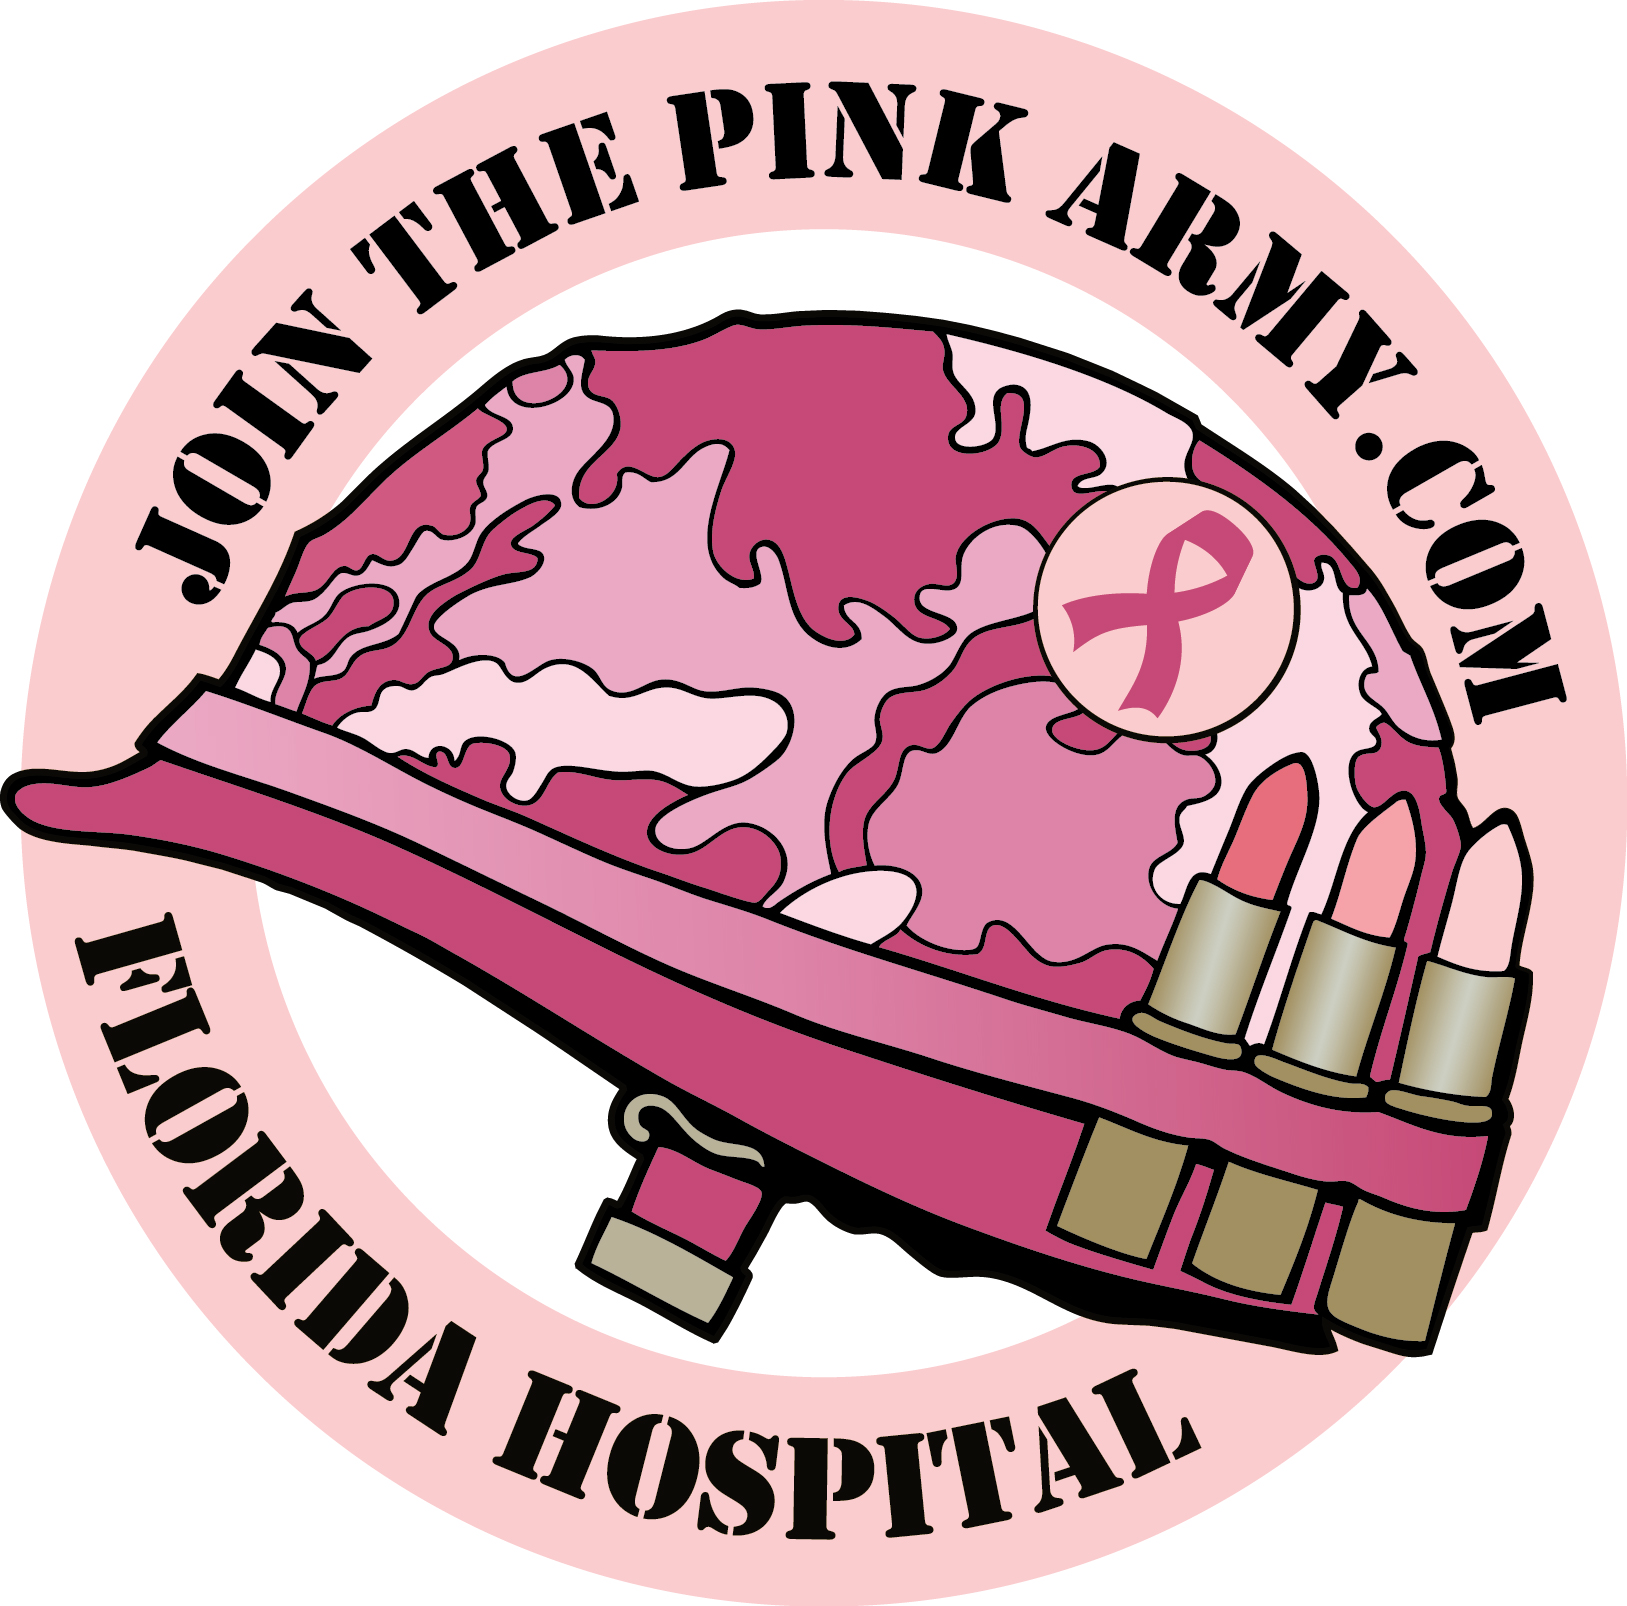 Join the Pink Army